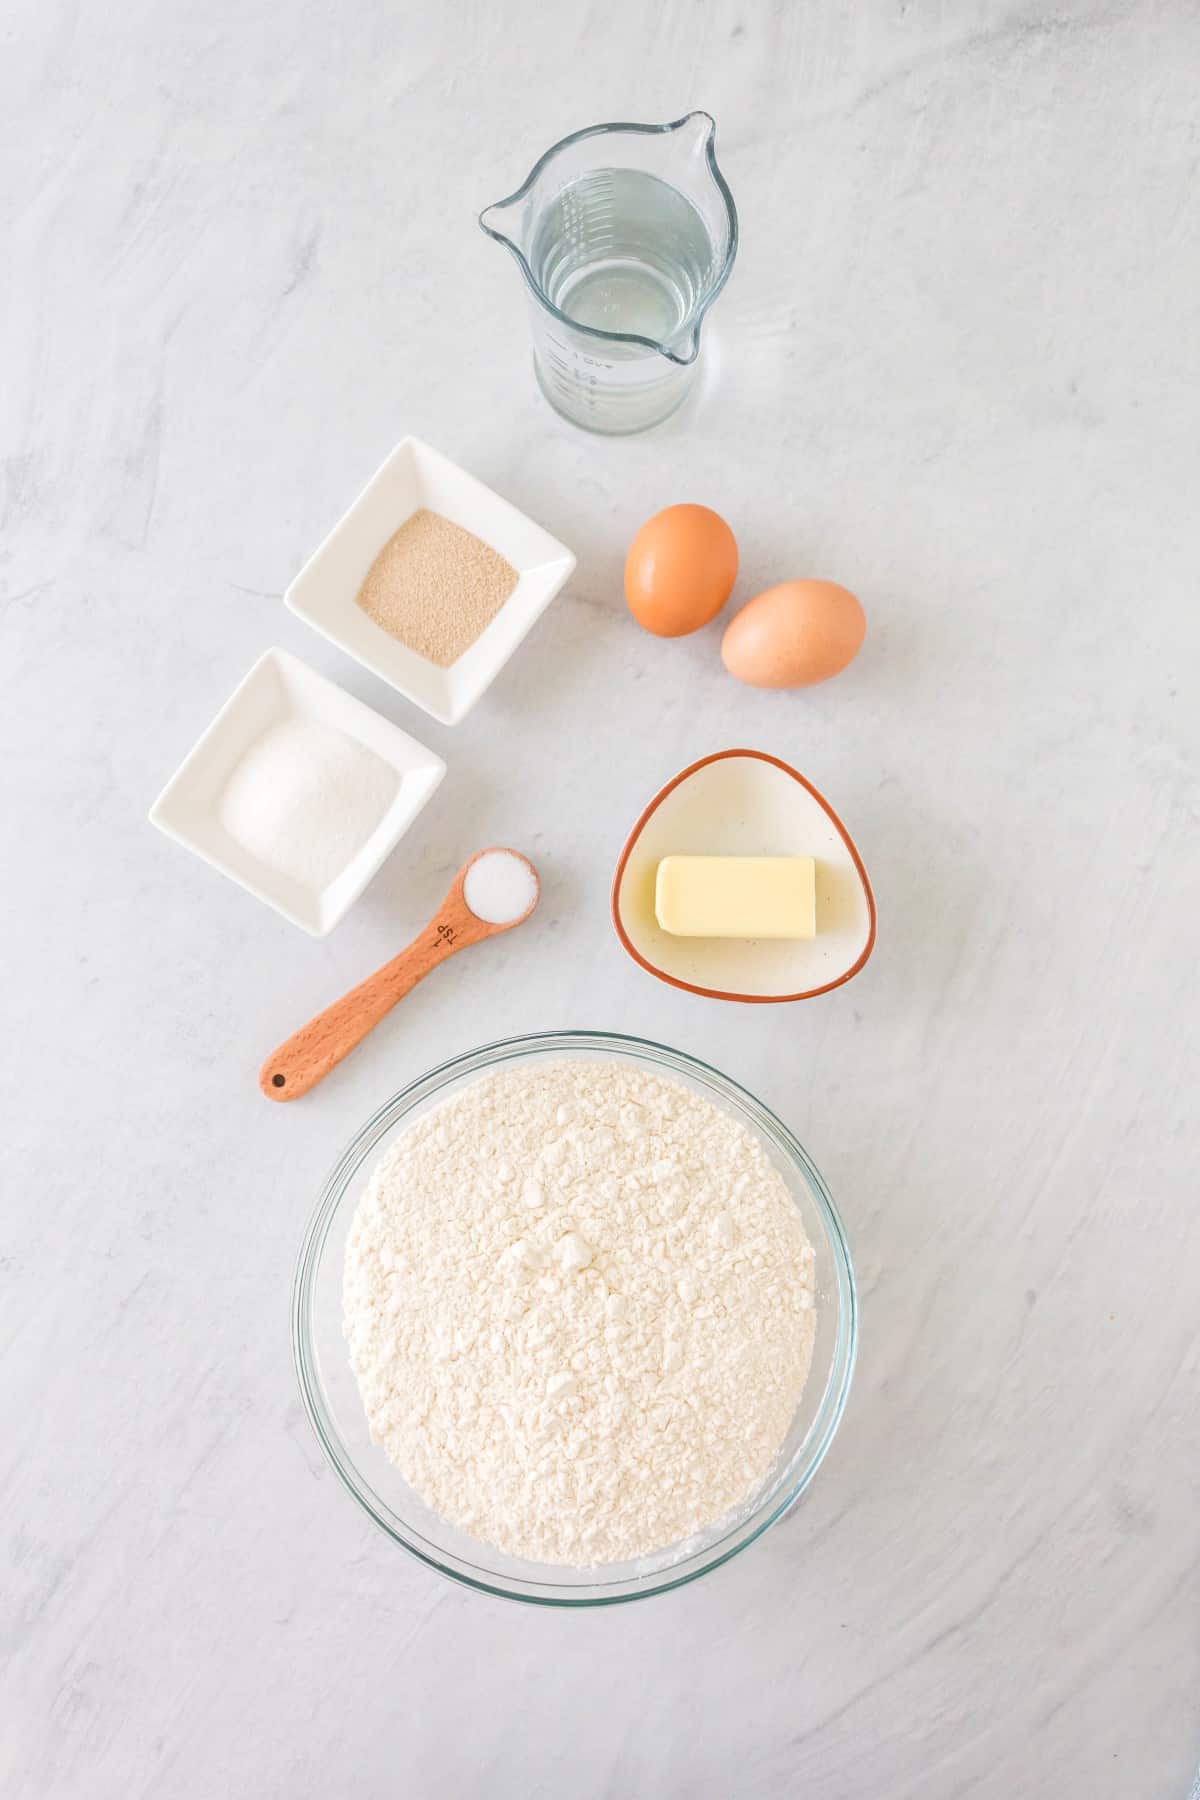 Ingredients for white braided bread